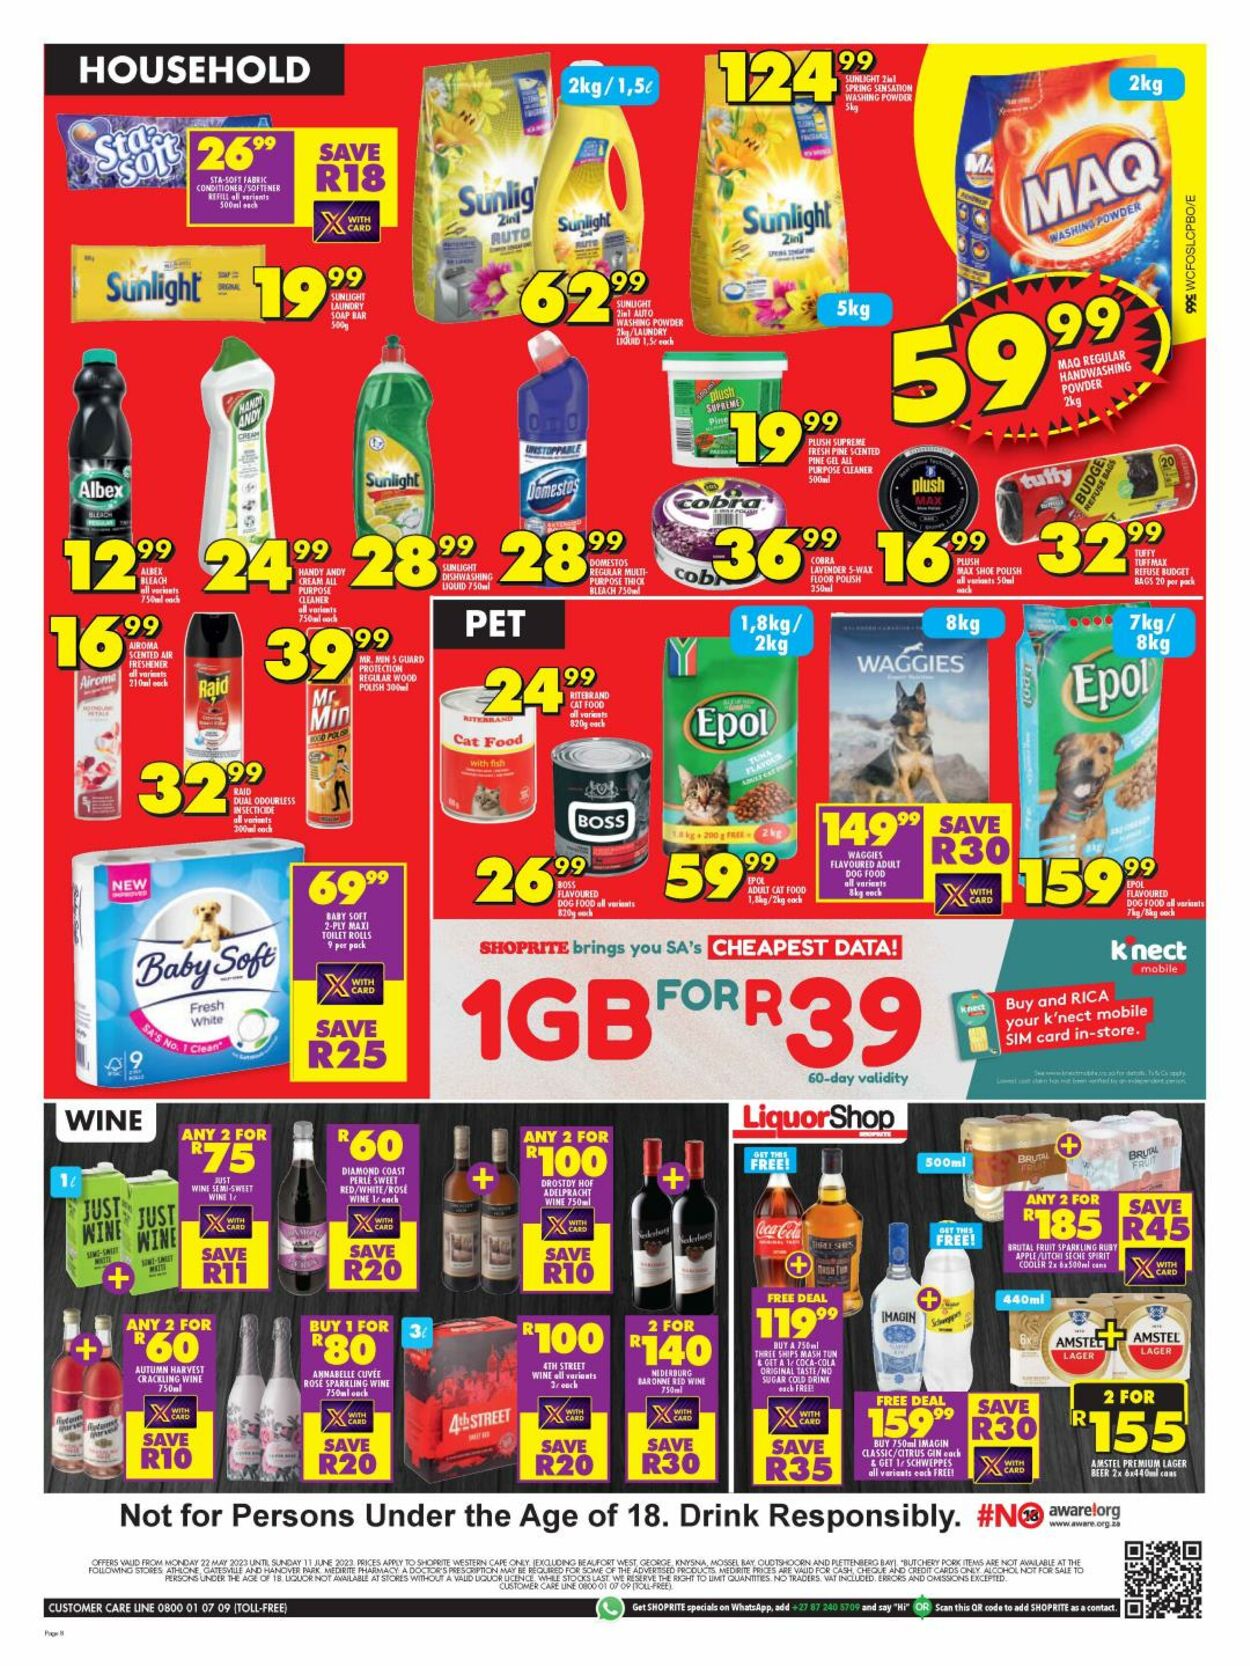 Shoprite Promotional Leaflet - Valid from 22.05 to 11.06 - Page nb 7 ...